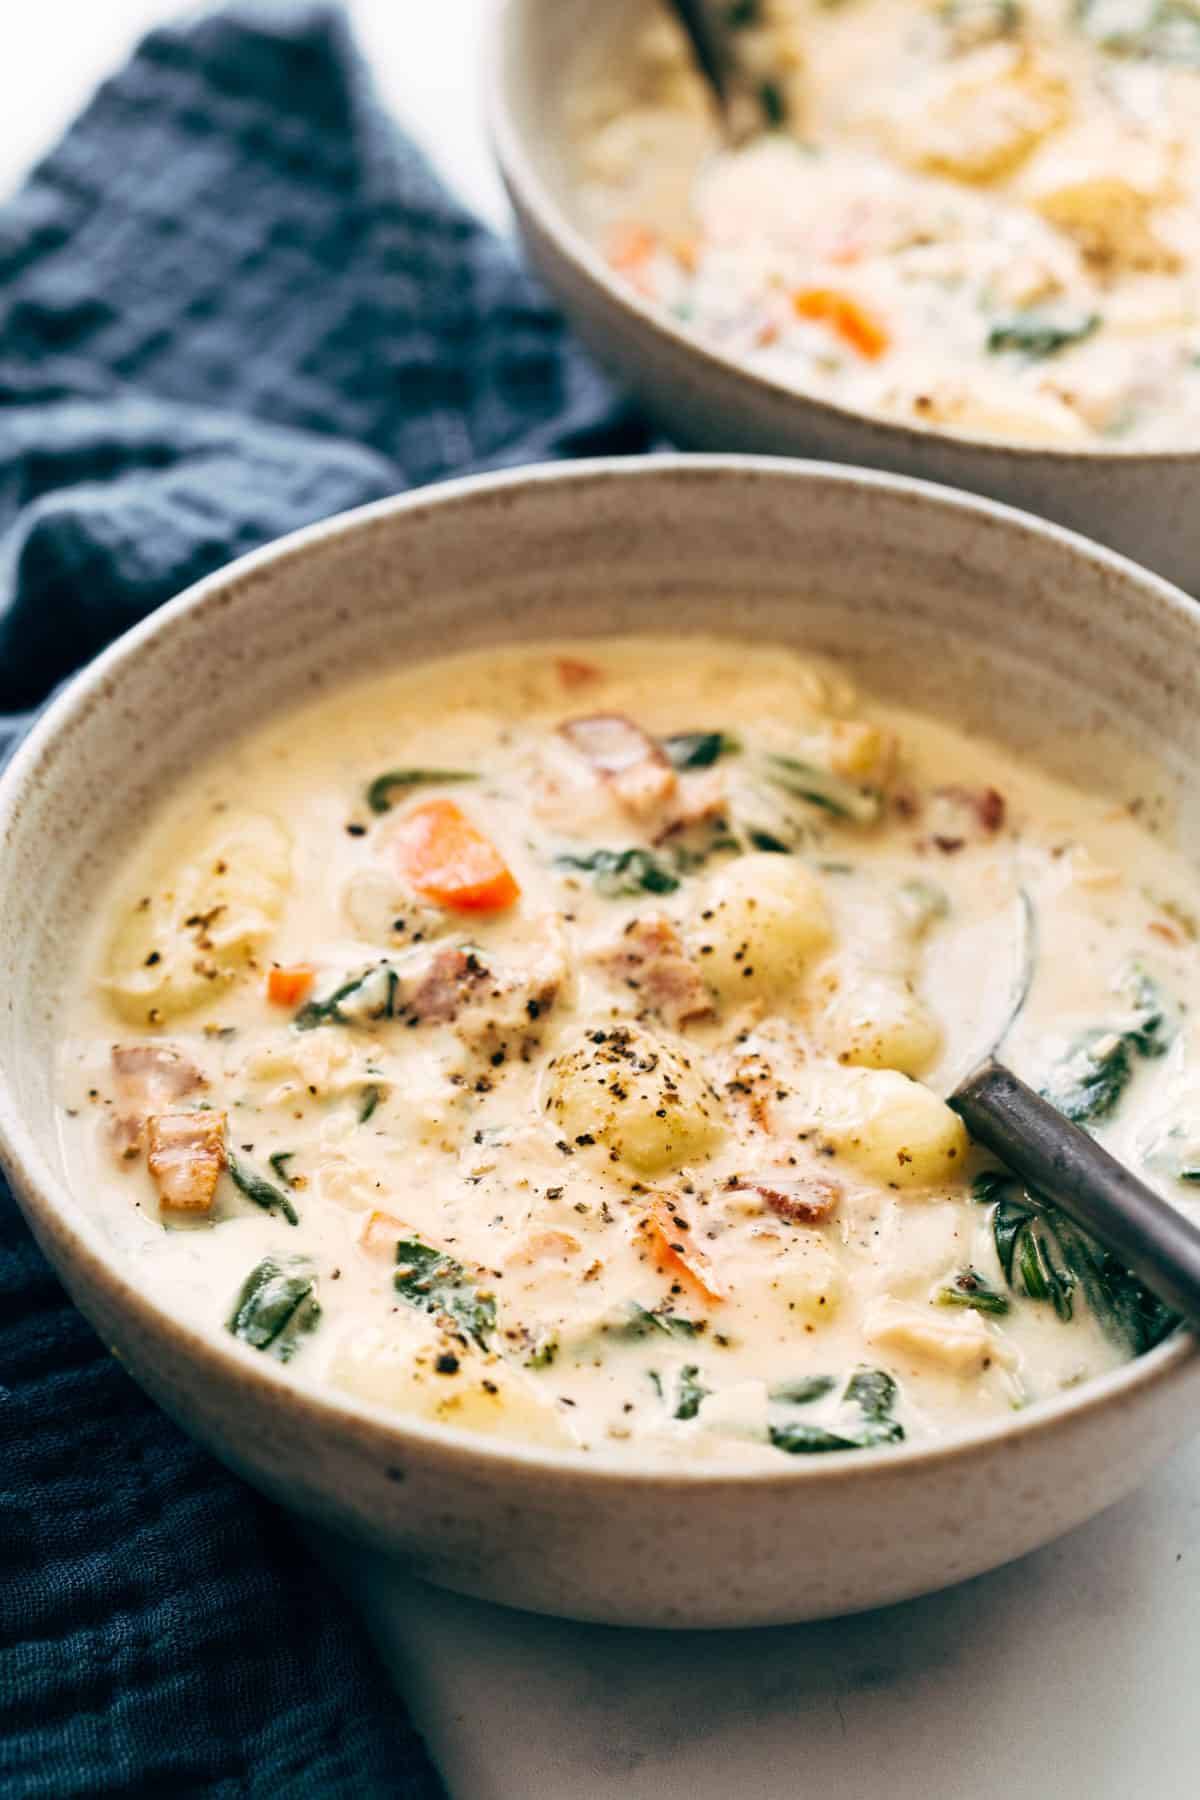 Crockpot Chicken Gnocchi Soup in a bowl with a spoon.